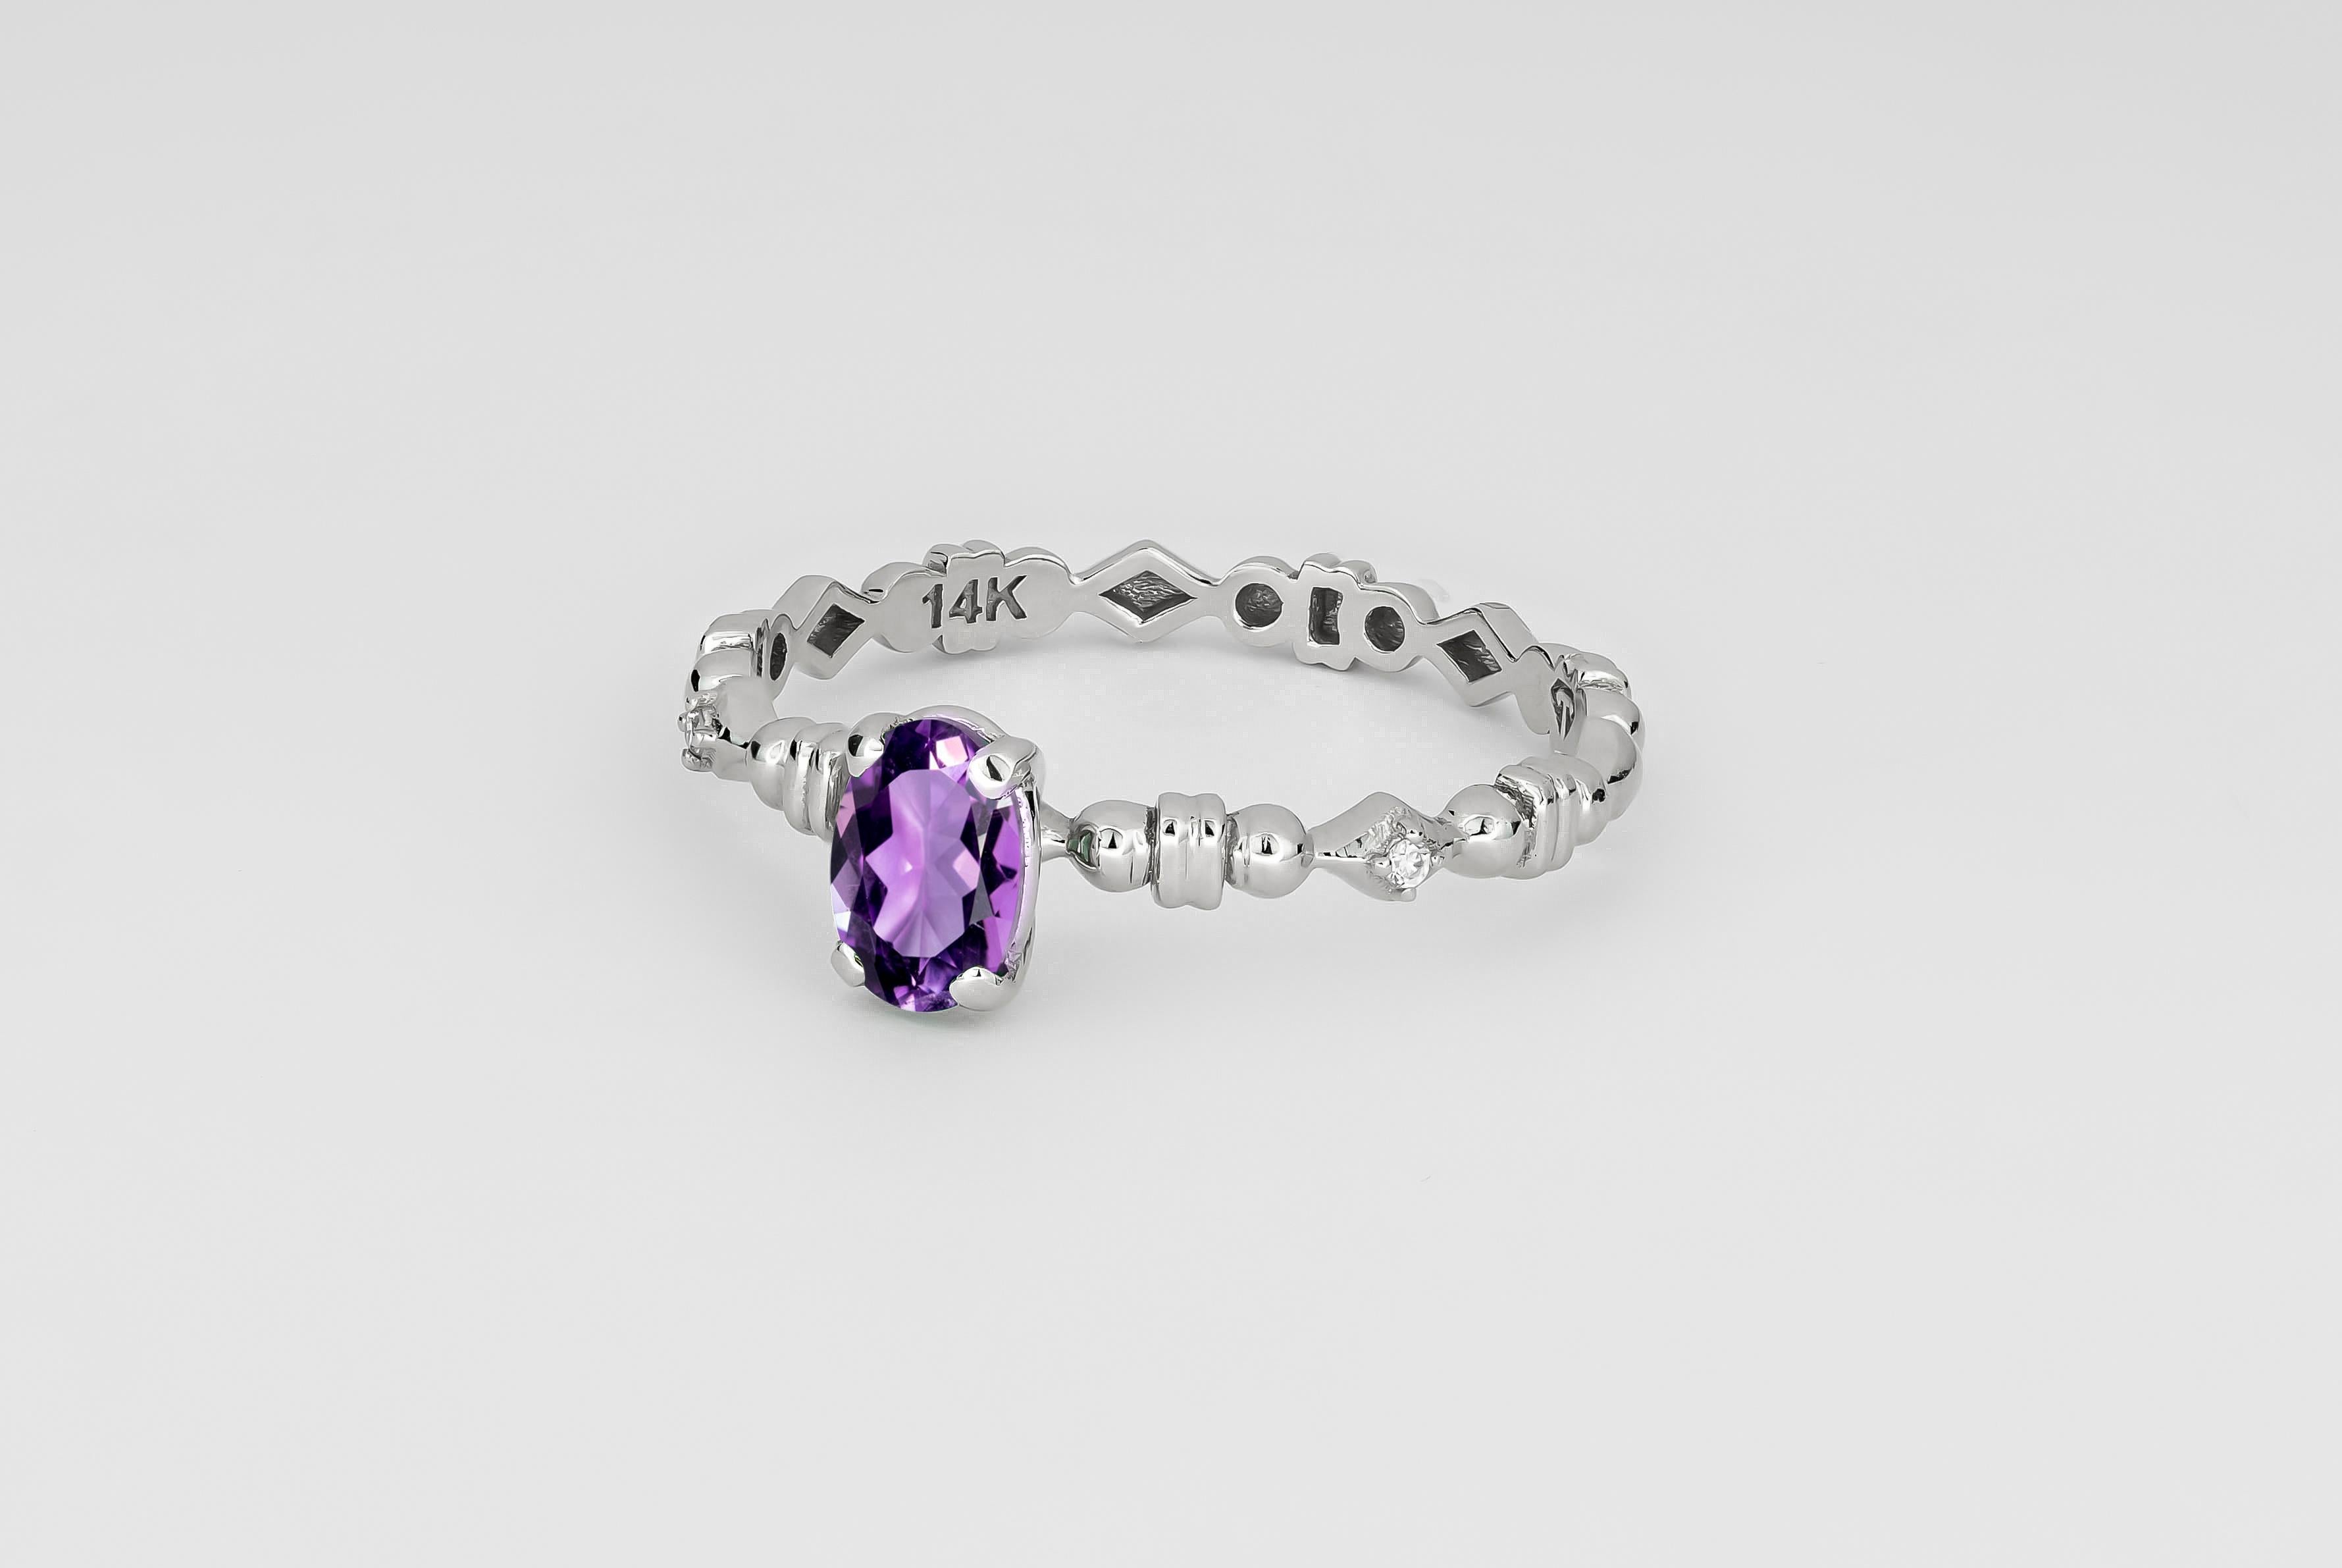 Amethyst engagement ring.Oval Amethyst ring. 14k gold ring with Amethyst. Amethyst stackable ring. Minimalist Amethyst ring. Amethyst promise ring. Gift for her. Amethyst ring for woman. February Birthstone Ring. Stackable ring. Amethyst gold ring.